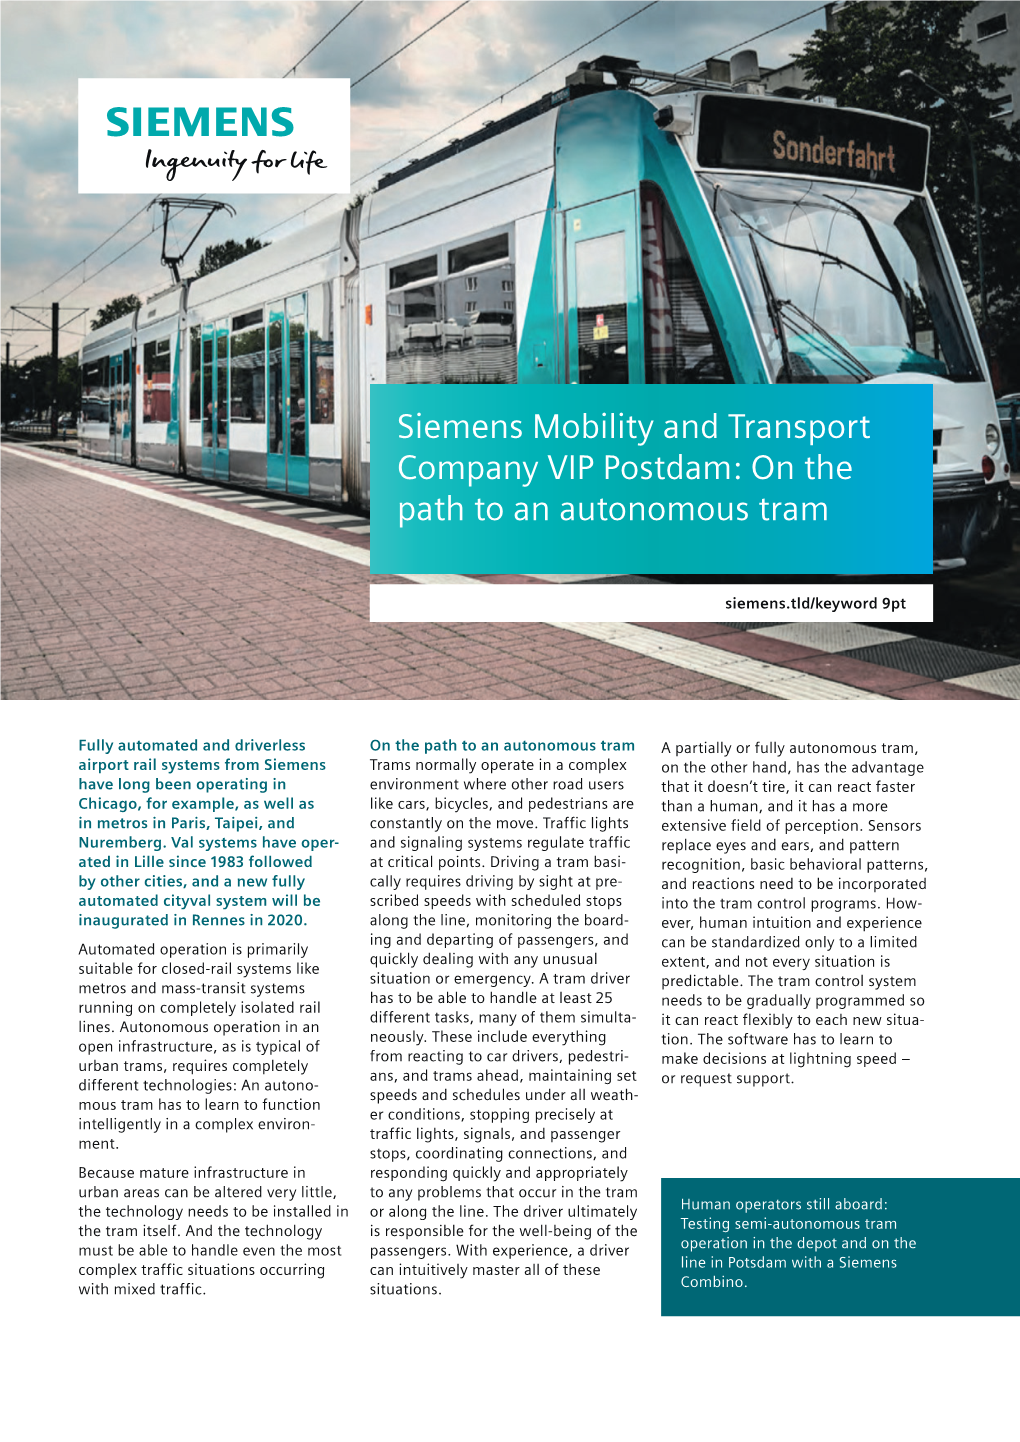 Article "On the Path to an Autonomous Tram"